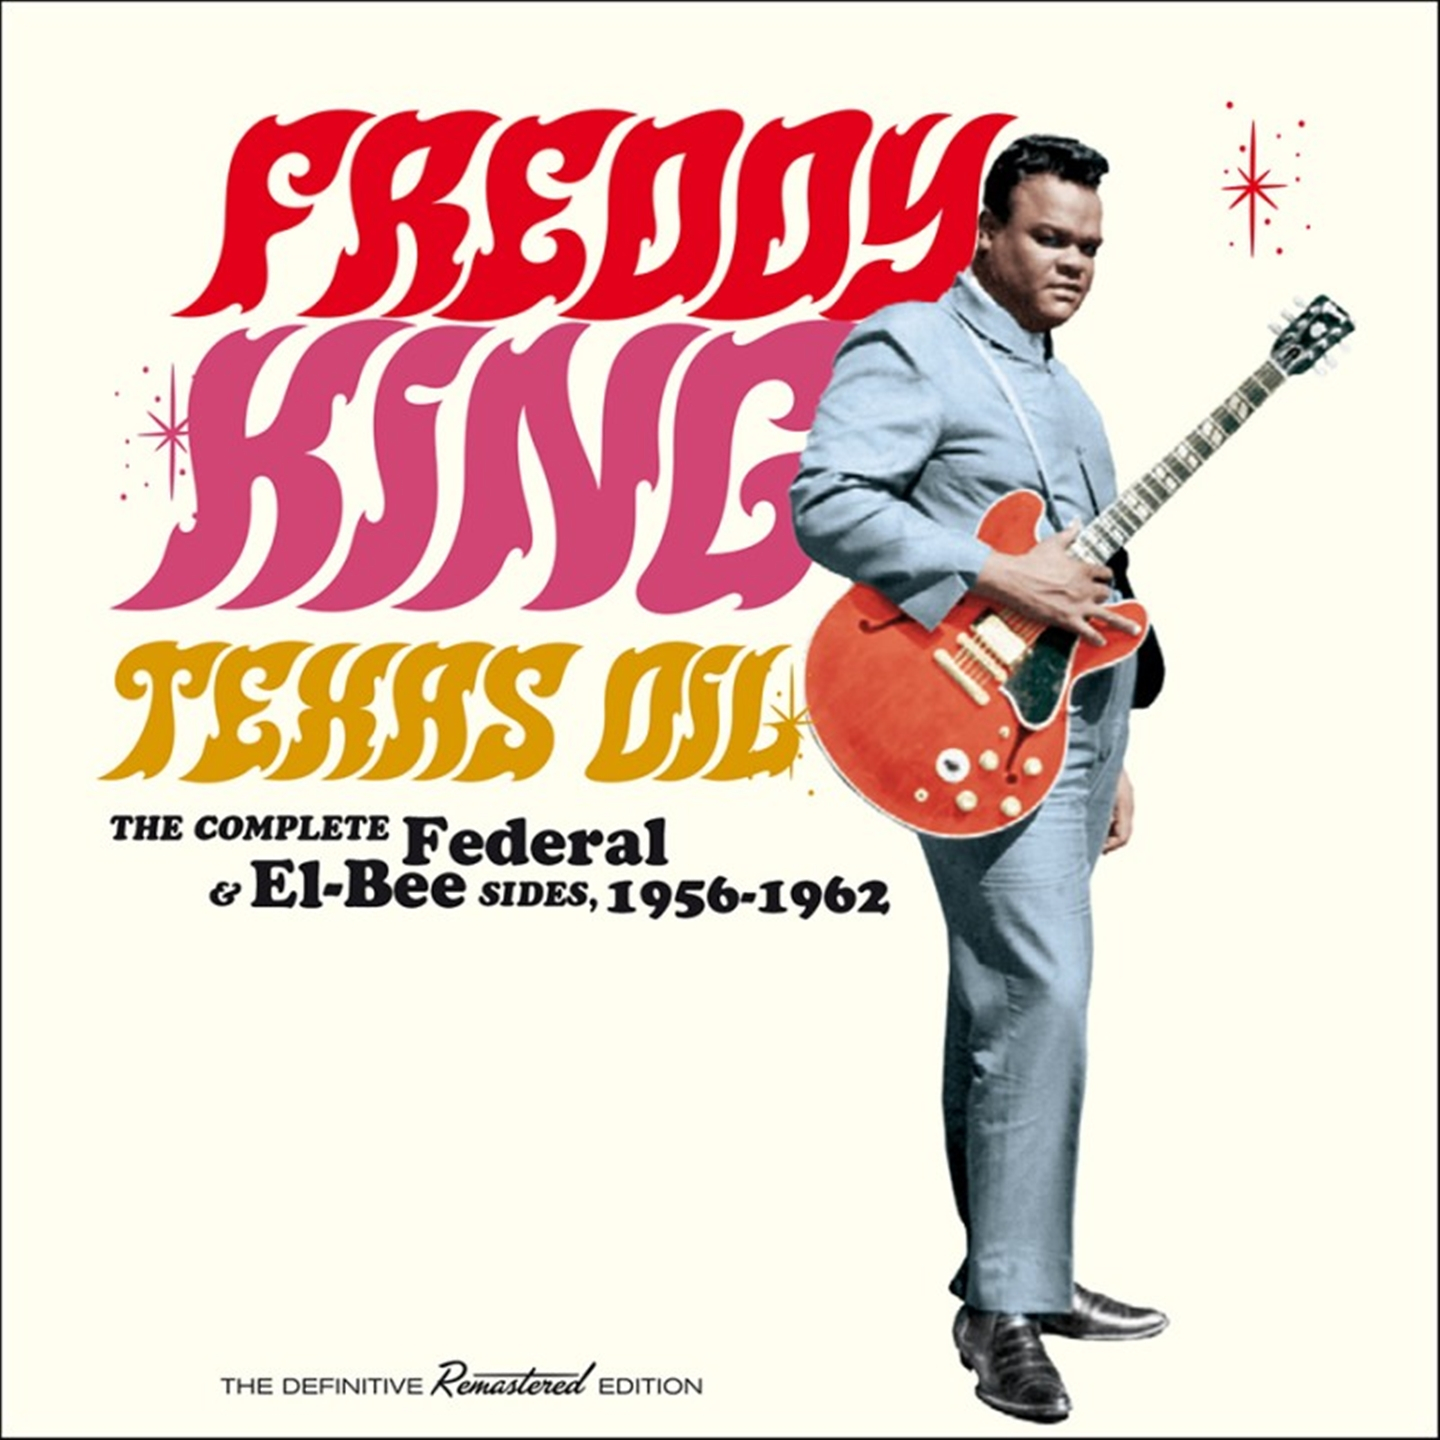 TEXAS OIL-THE COMPLETE FEDERAL & EL-BEE SIDES, 1956-1962 (2-CD SET)